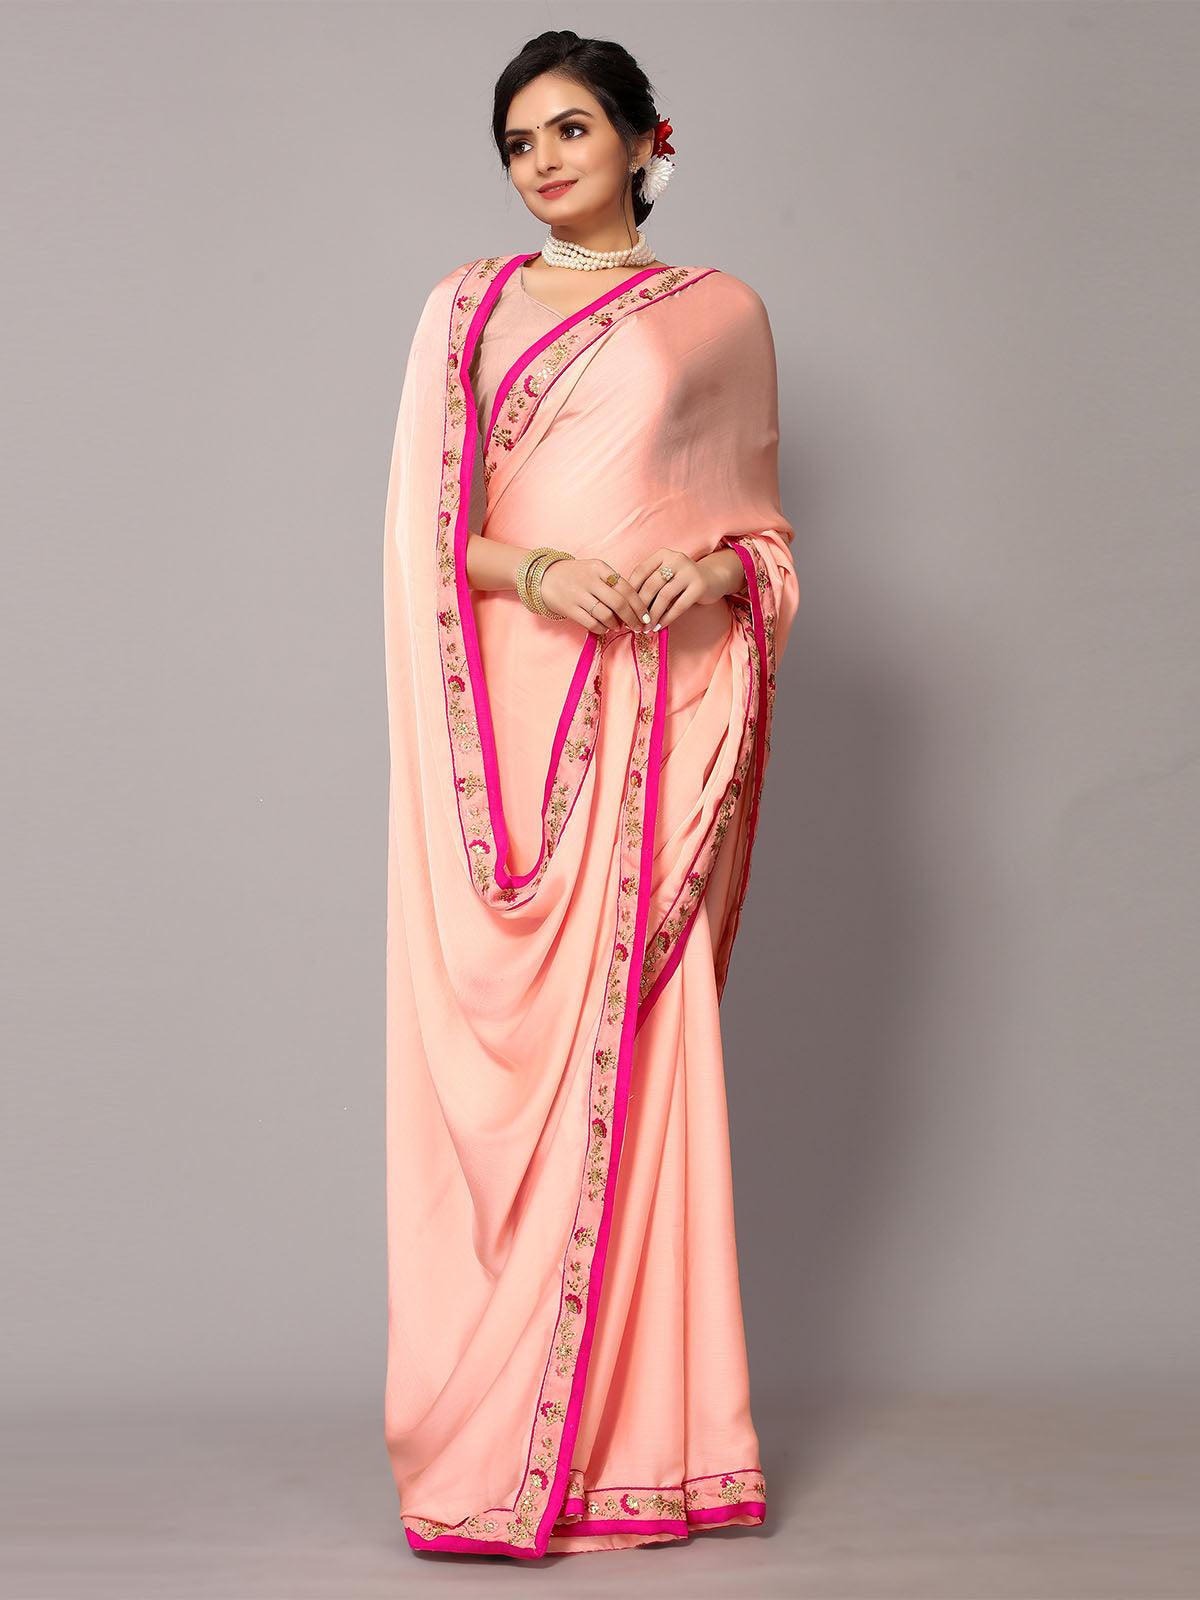 Women's Peach Poly Chiffion Embroidery Border Work Saree With Blouse - Odette